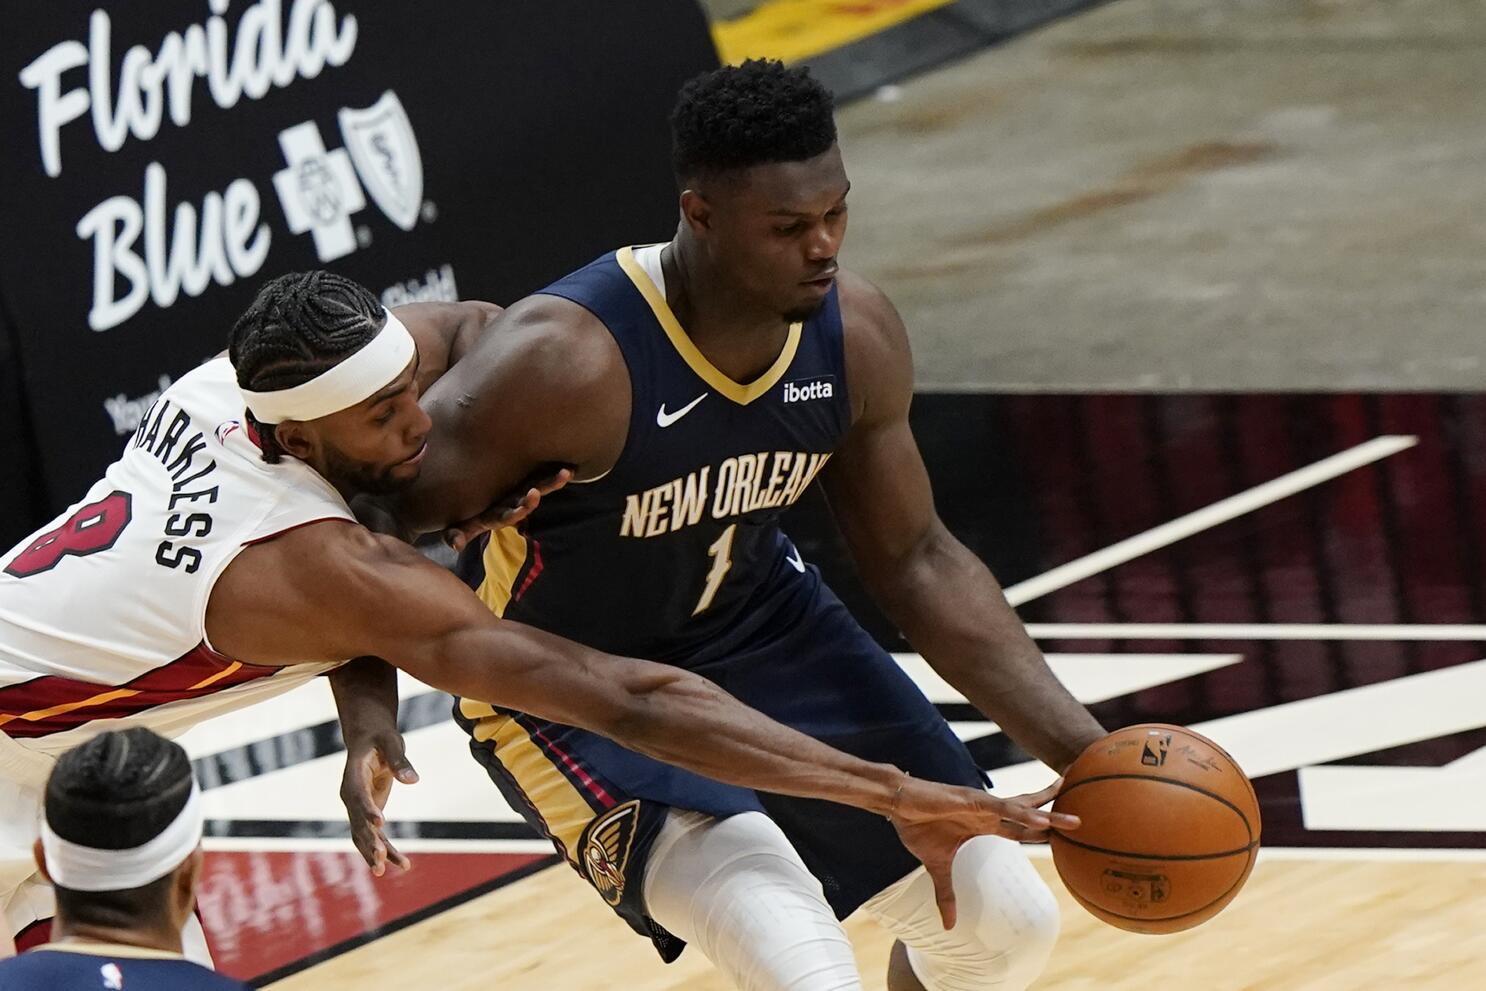 That One Play: Why nobody can stop Pelicans star Zion Williamson